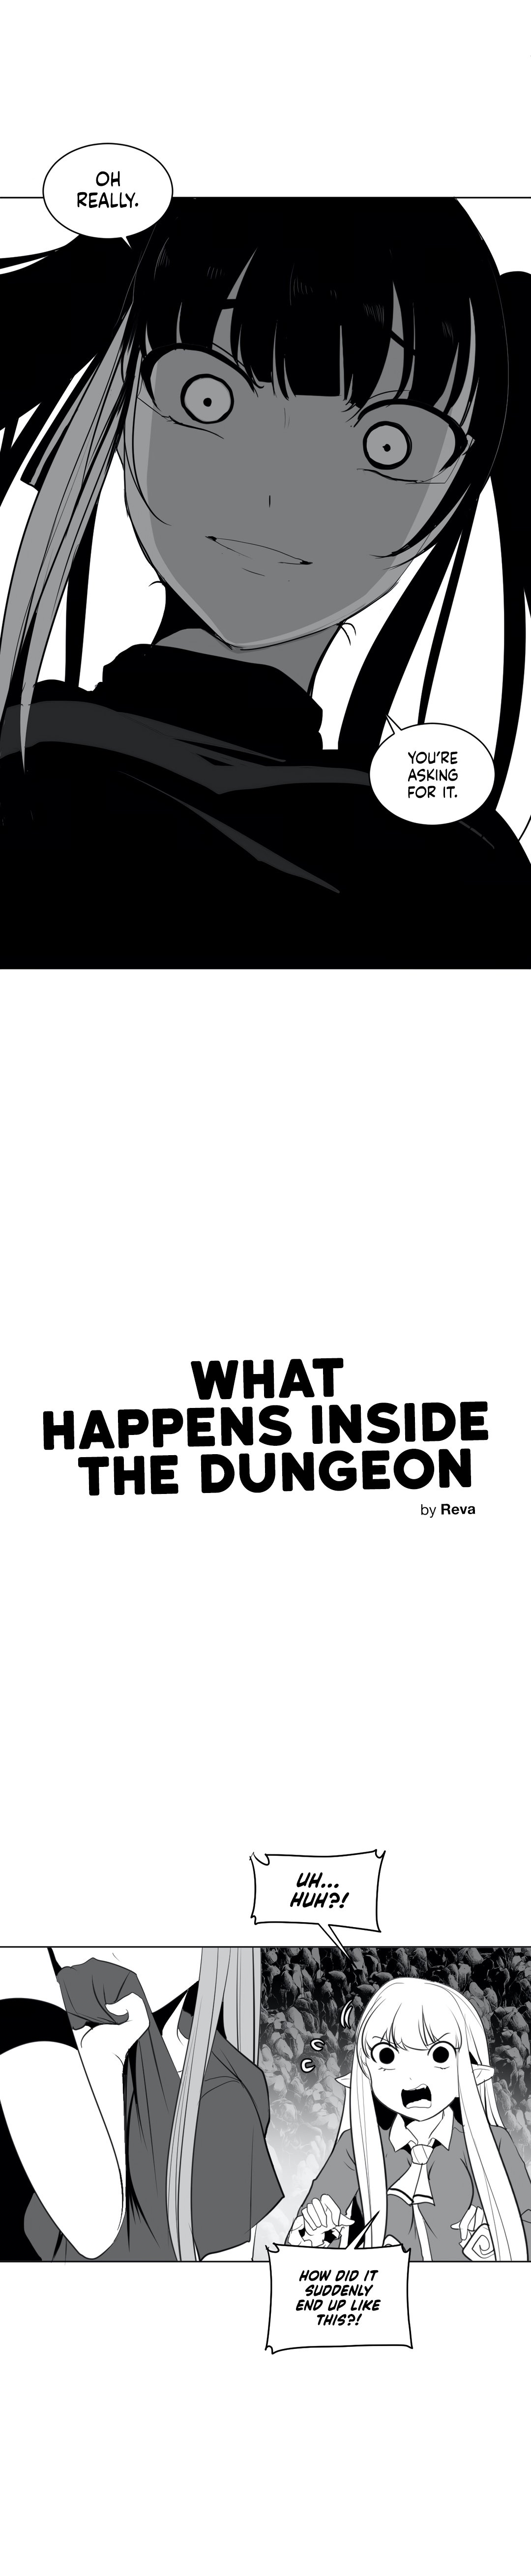 What Happens Inside The Dungeon - Page 3